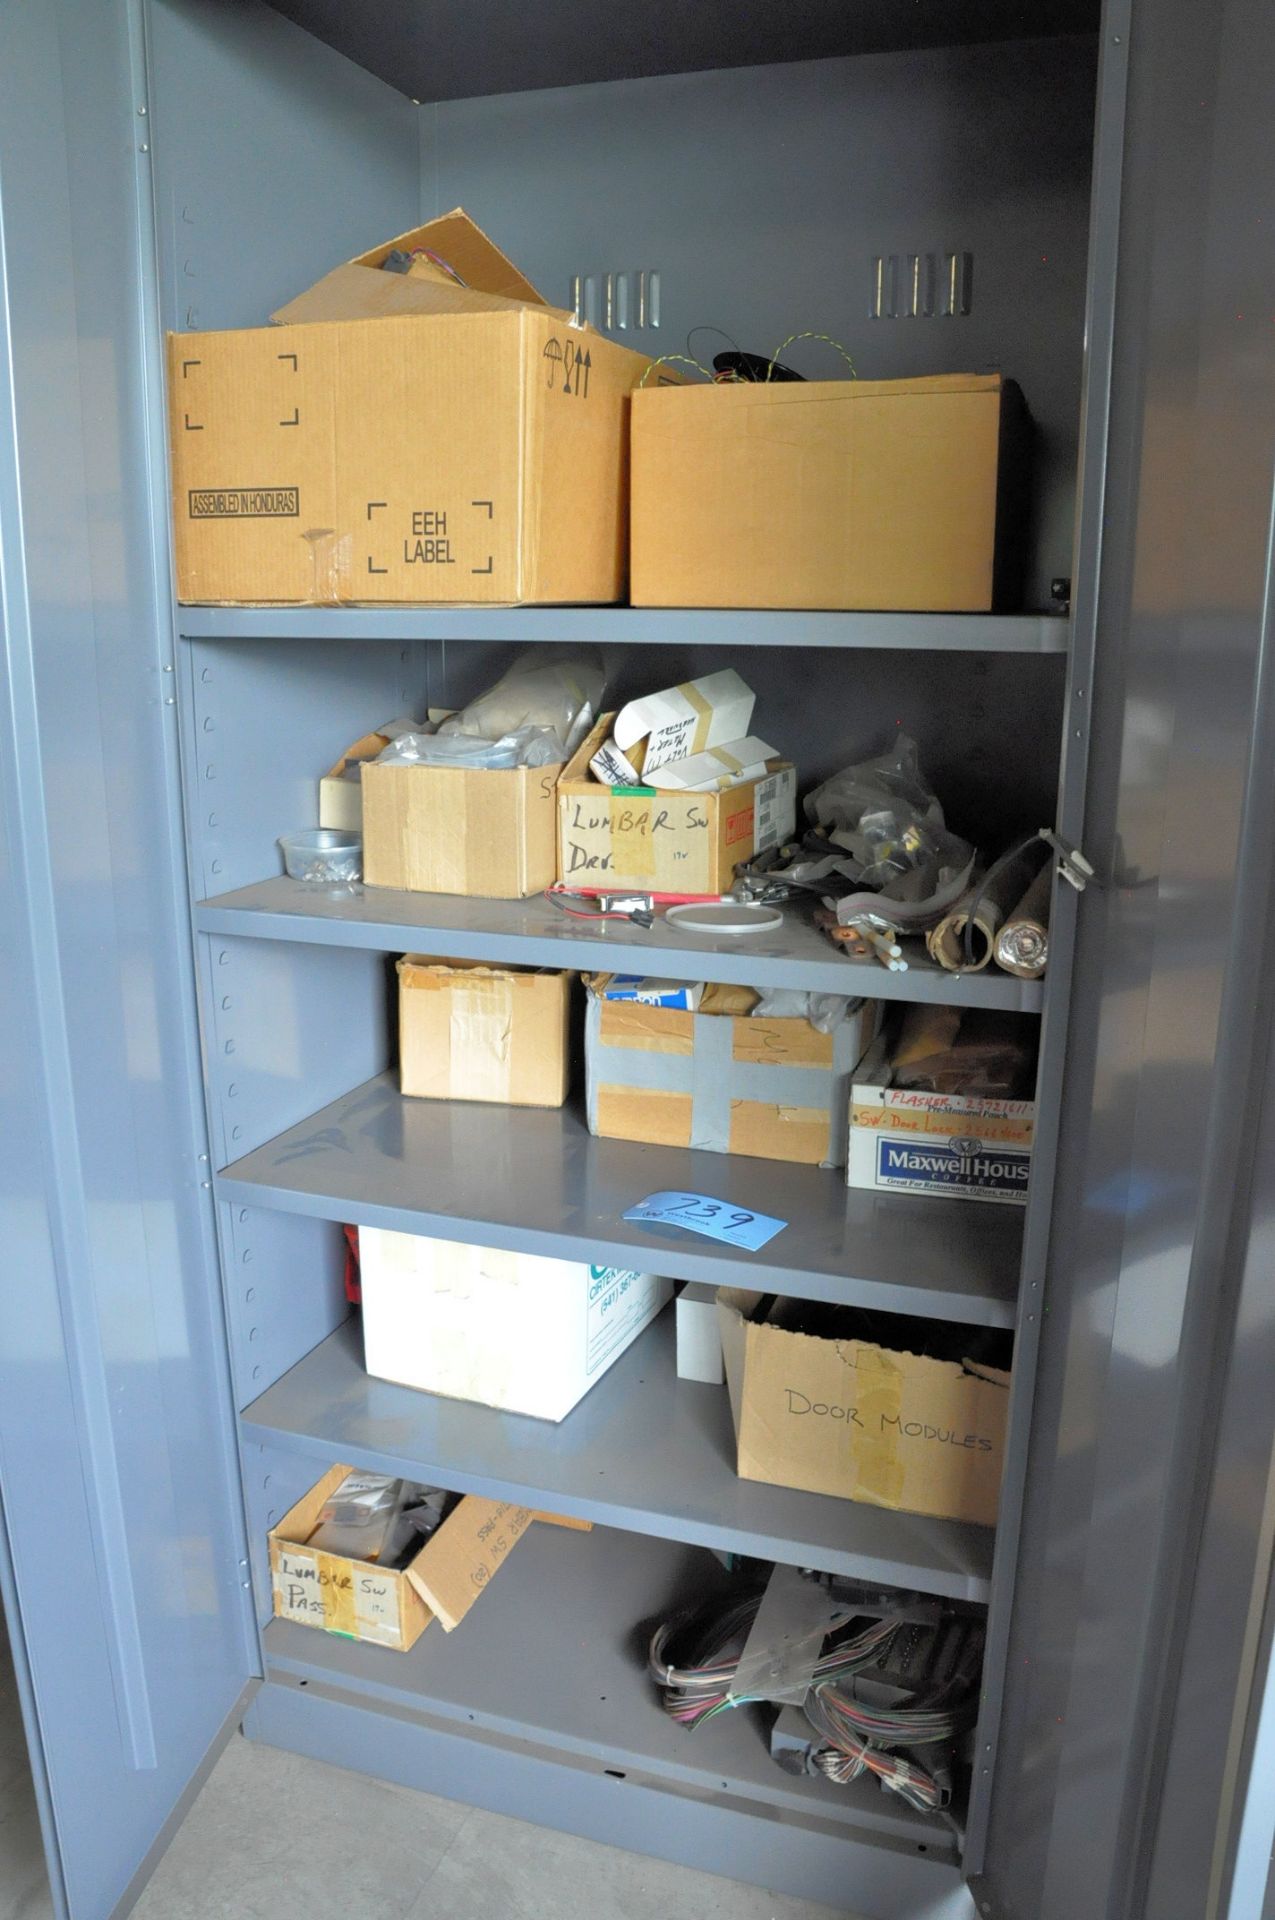 Lot-(4) Cabinets and (1) Shelving Unit with Various Electrical Components Contents - Image 6 of 7